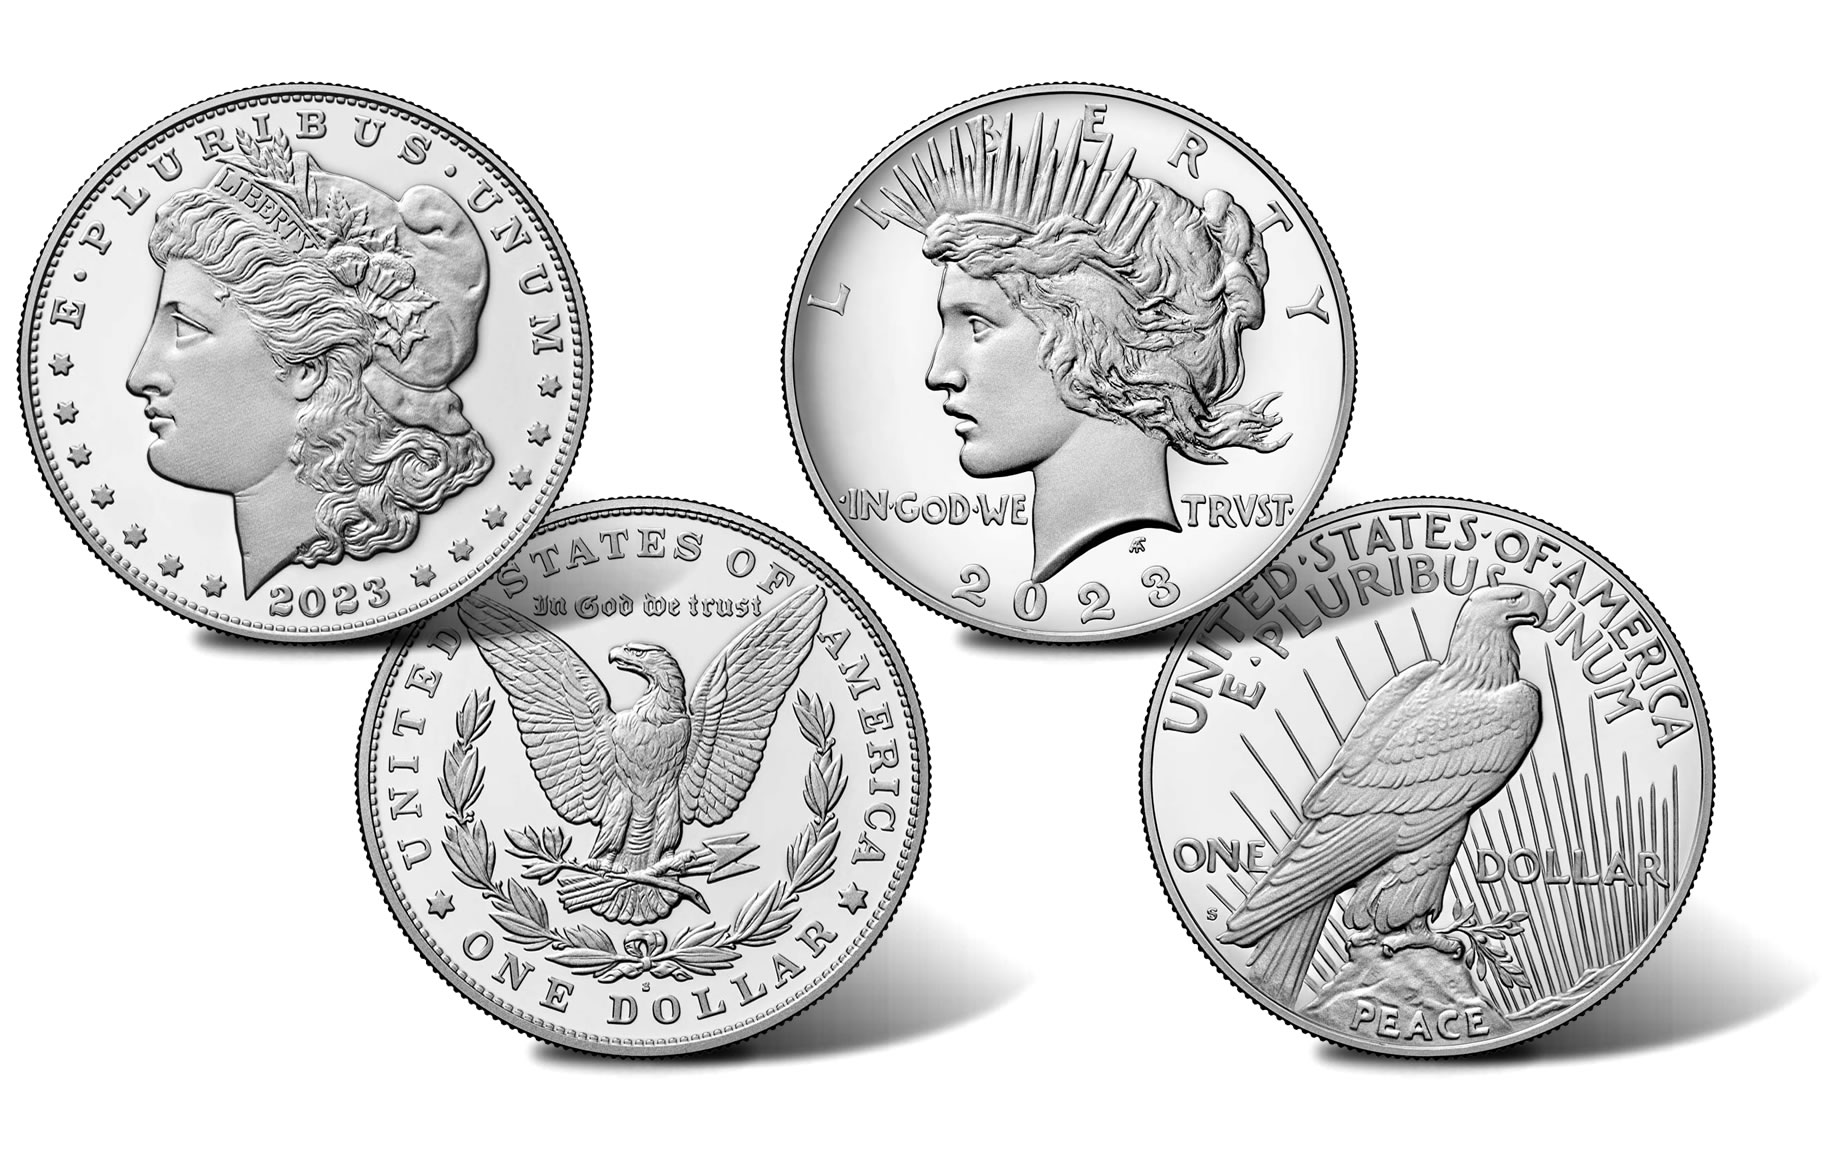 These are the one-cent coins that could be worth up to $60,000 dollars - AS  USA